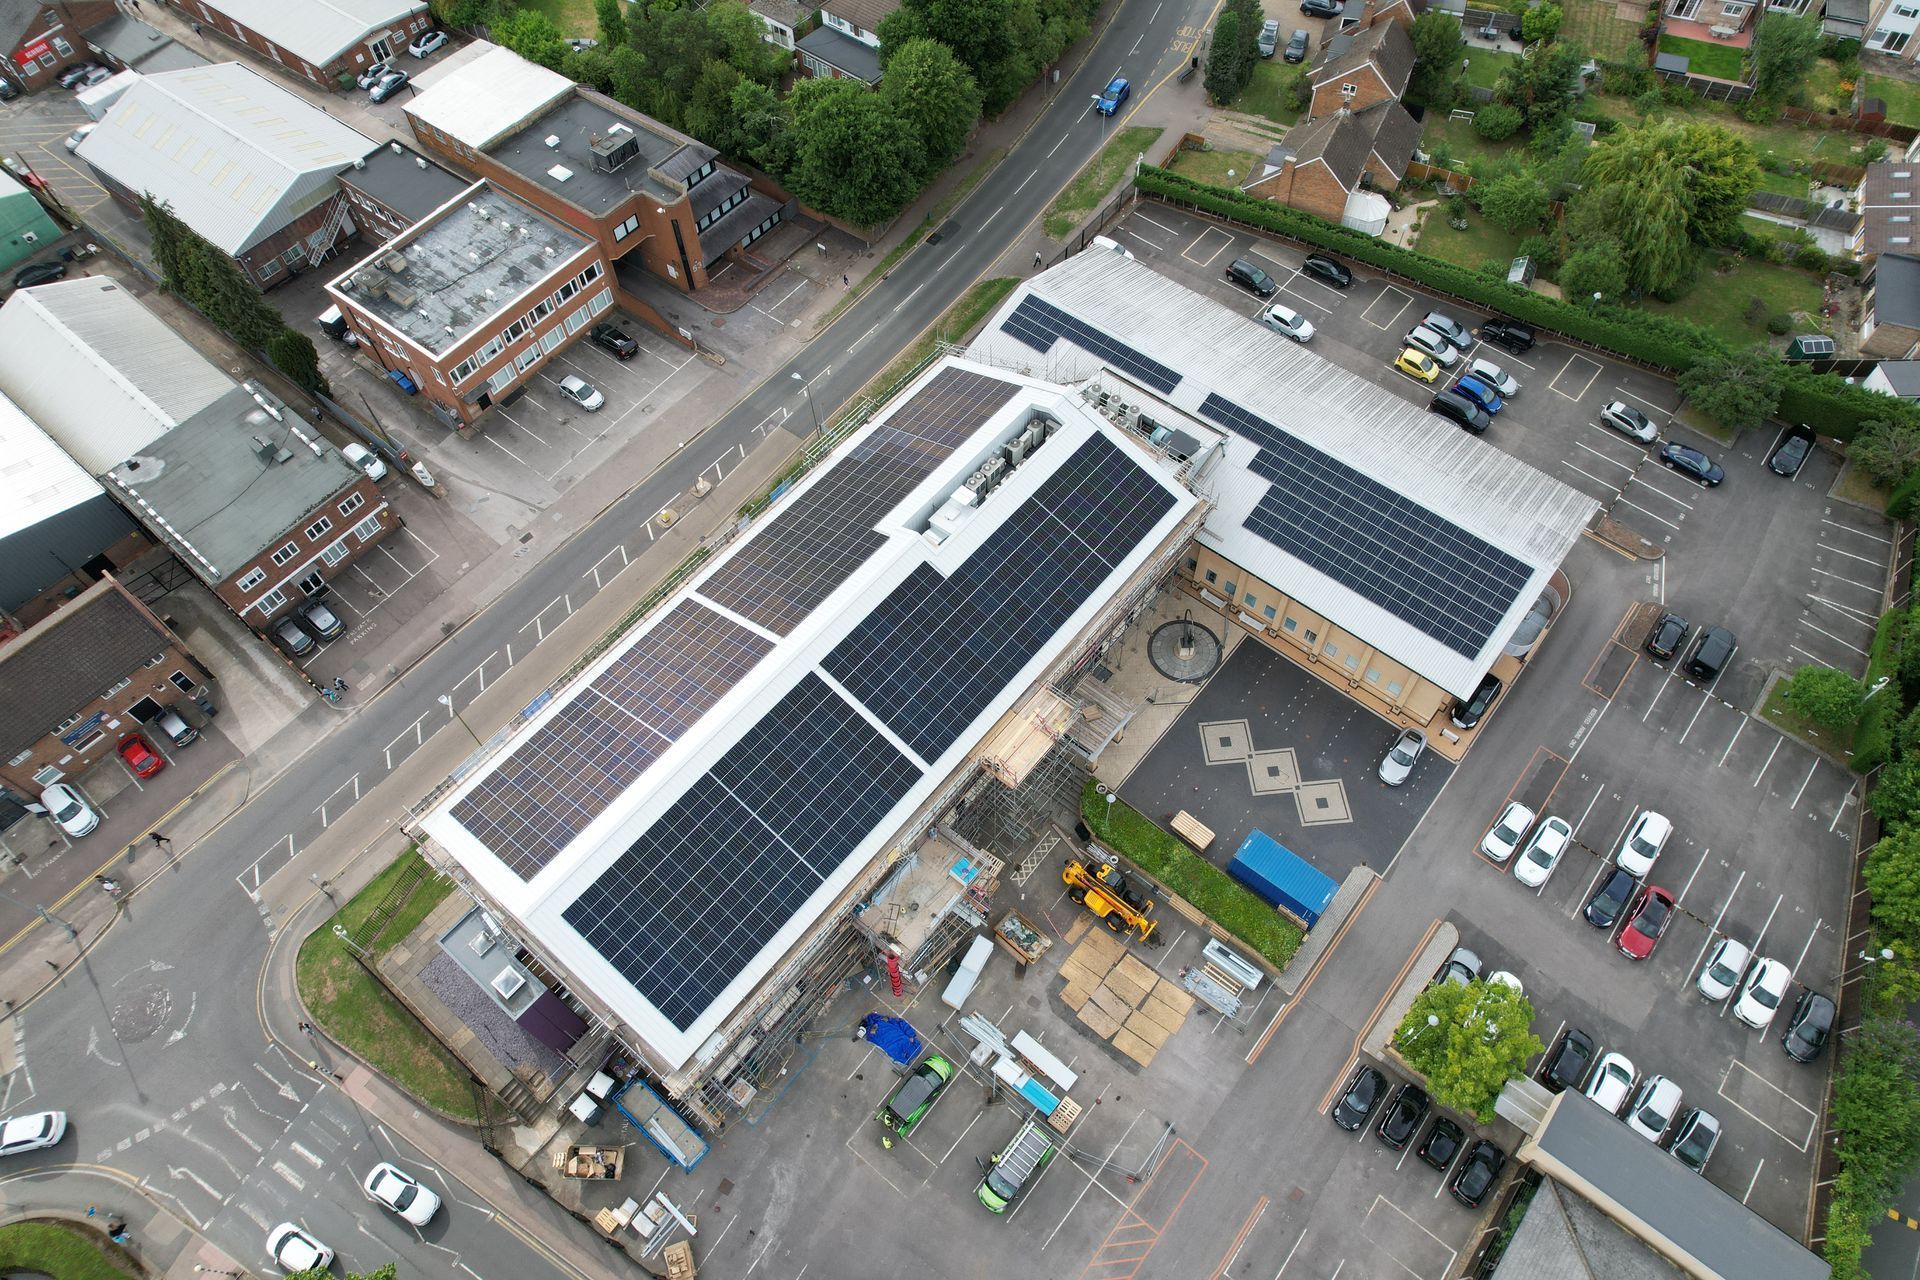 An aerial view of a building with solar panels on the roof